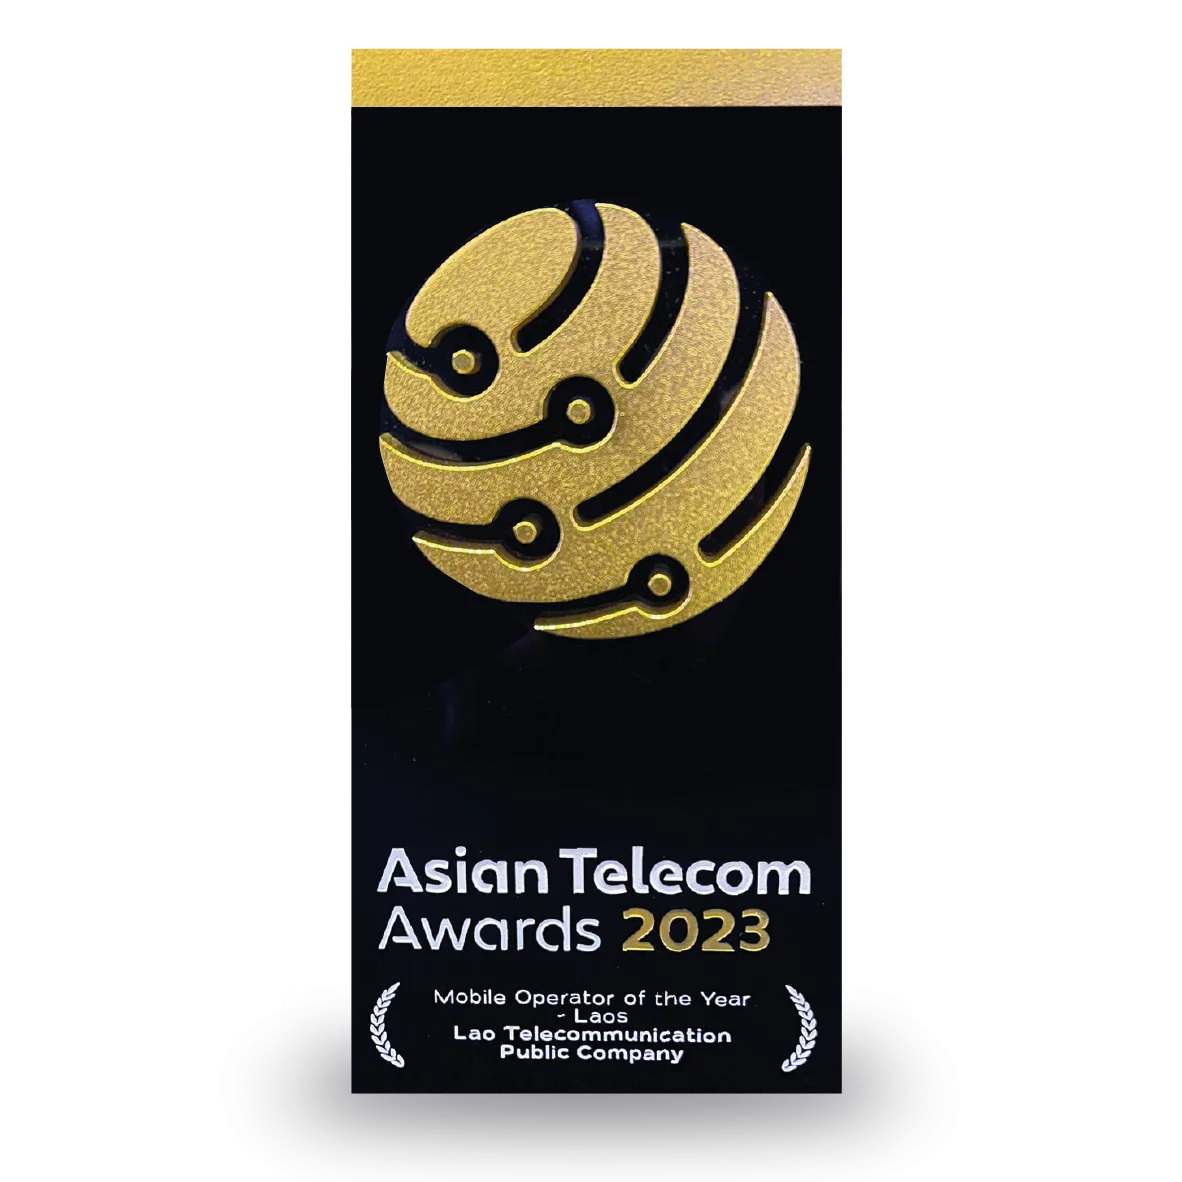 Asian Telecom Awards 2023 - Mobile Operator of the Year